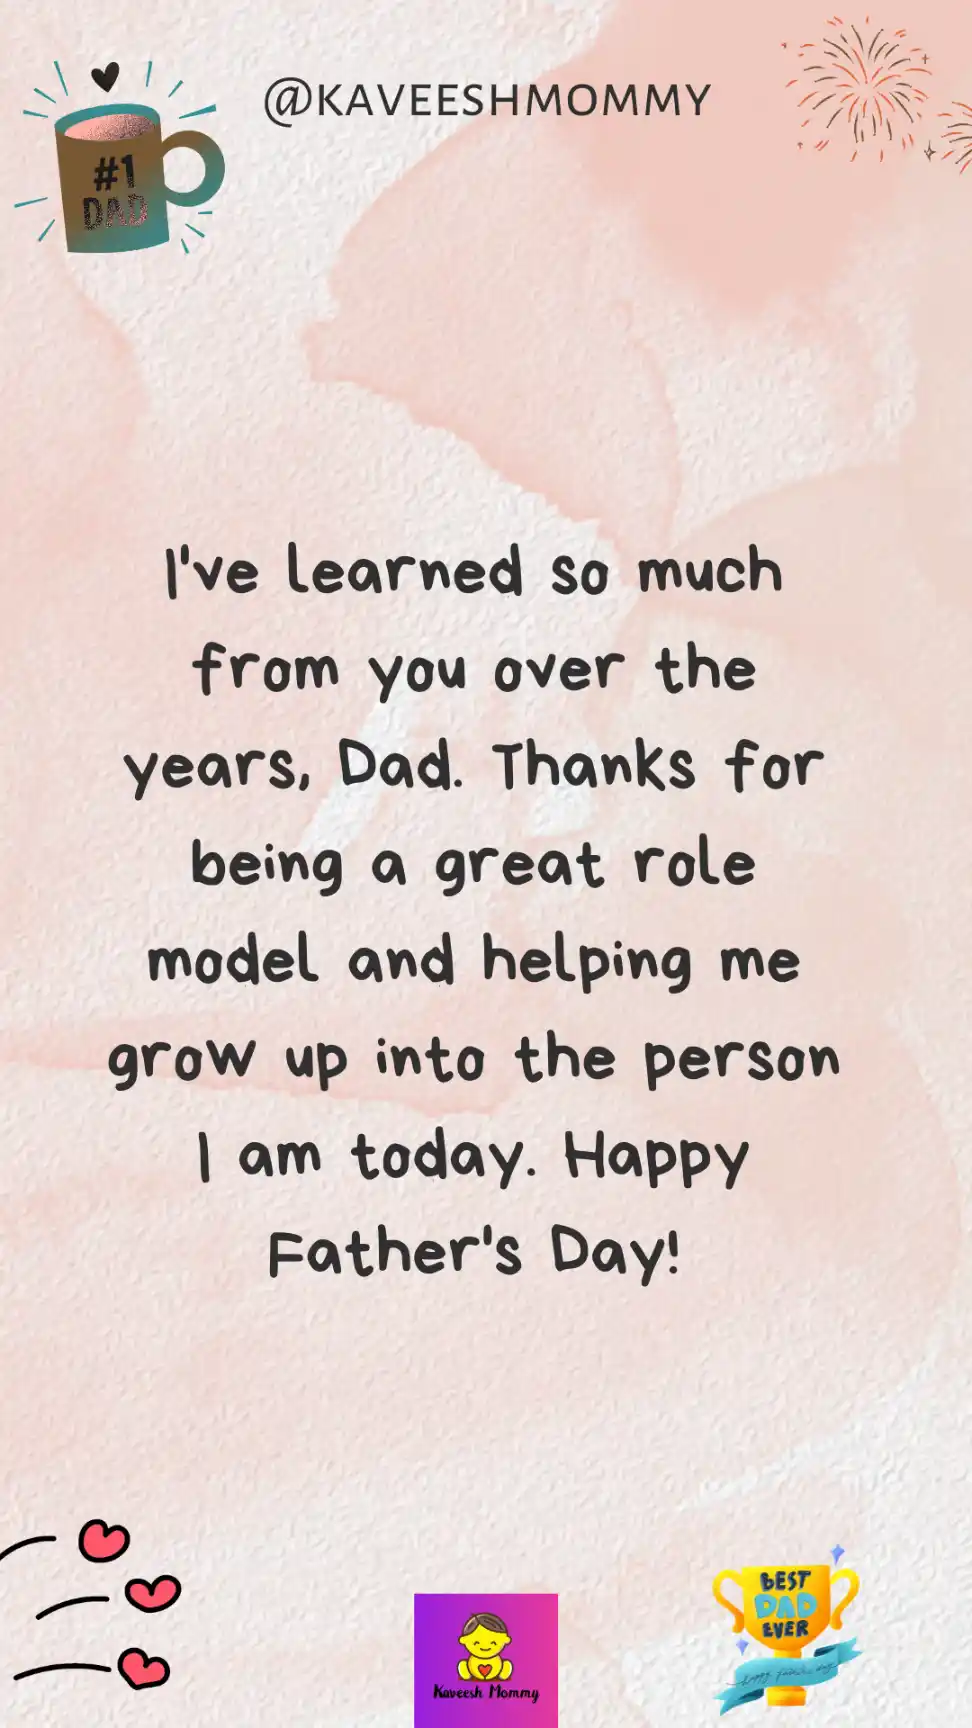 Happy Fathers Day Quotes-I've learned so much from you over the years, Dad. Thanks for being a great role model and helping me grow up into the person I am today. Happy Father's Day!